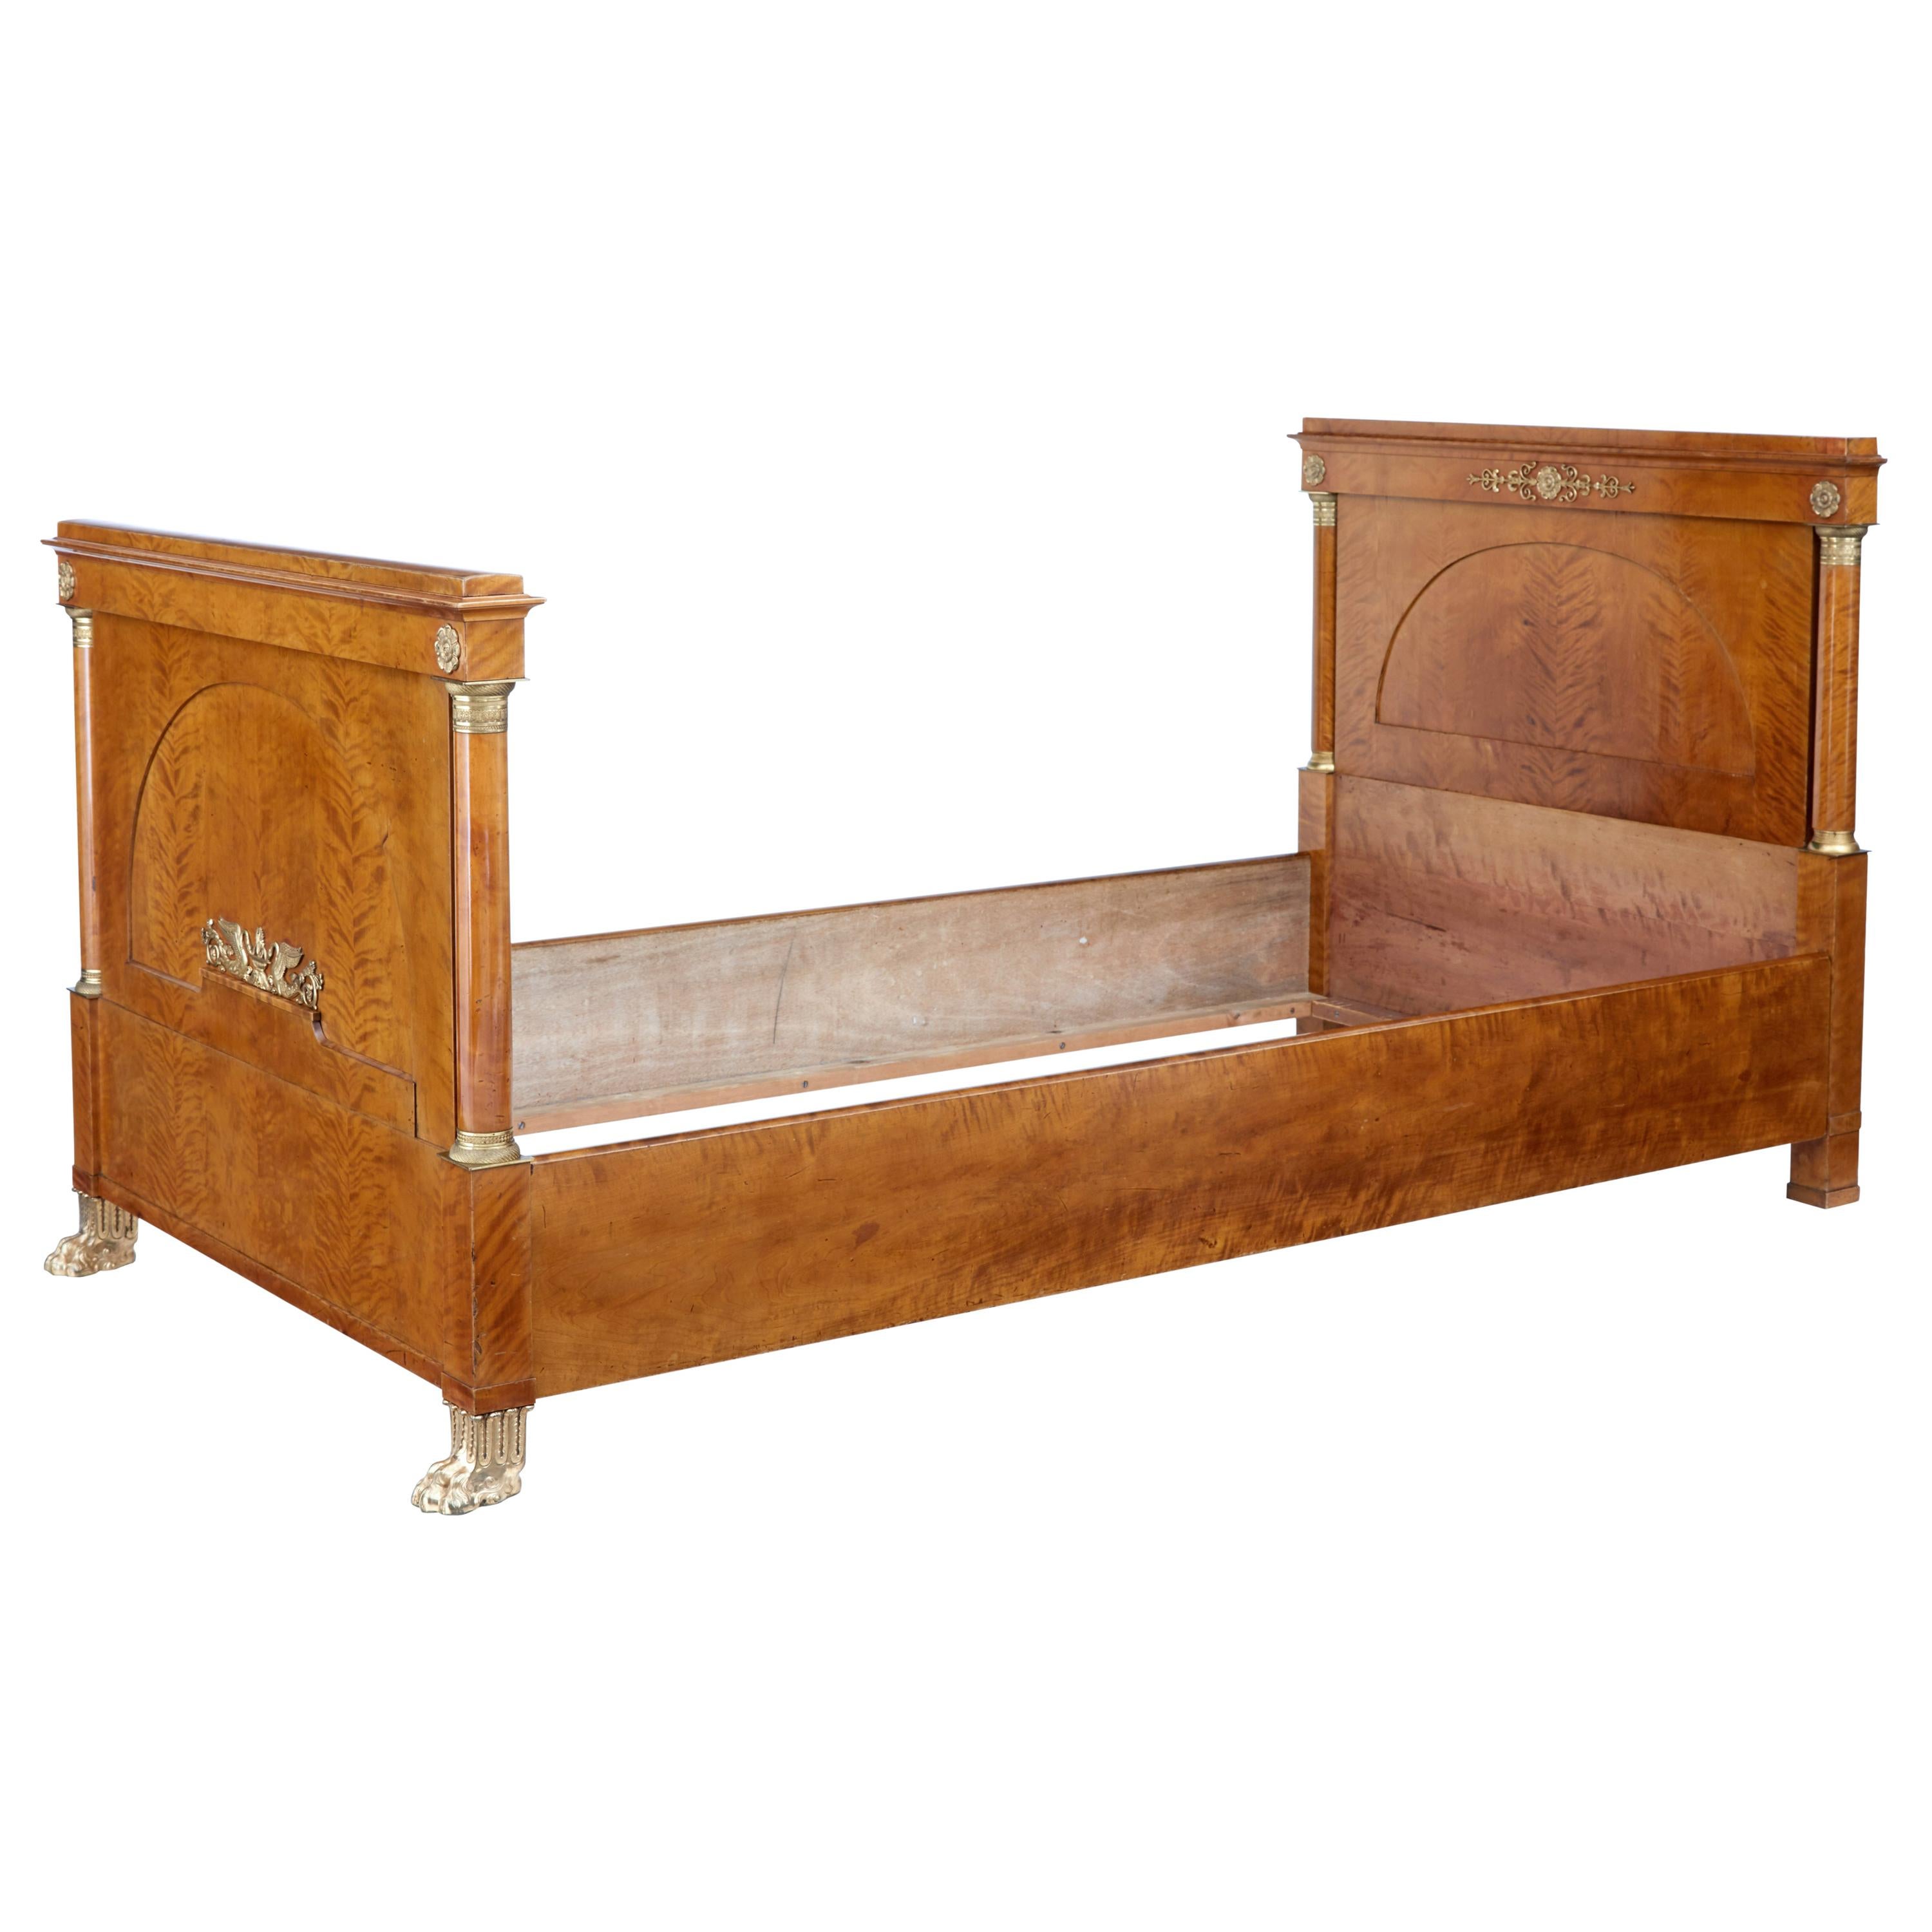 Early 20th Century Birch Empire Bed Frame